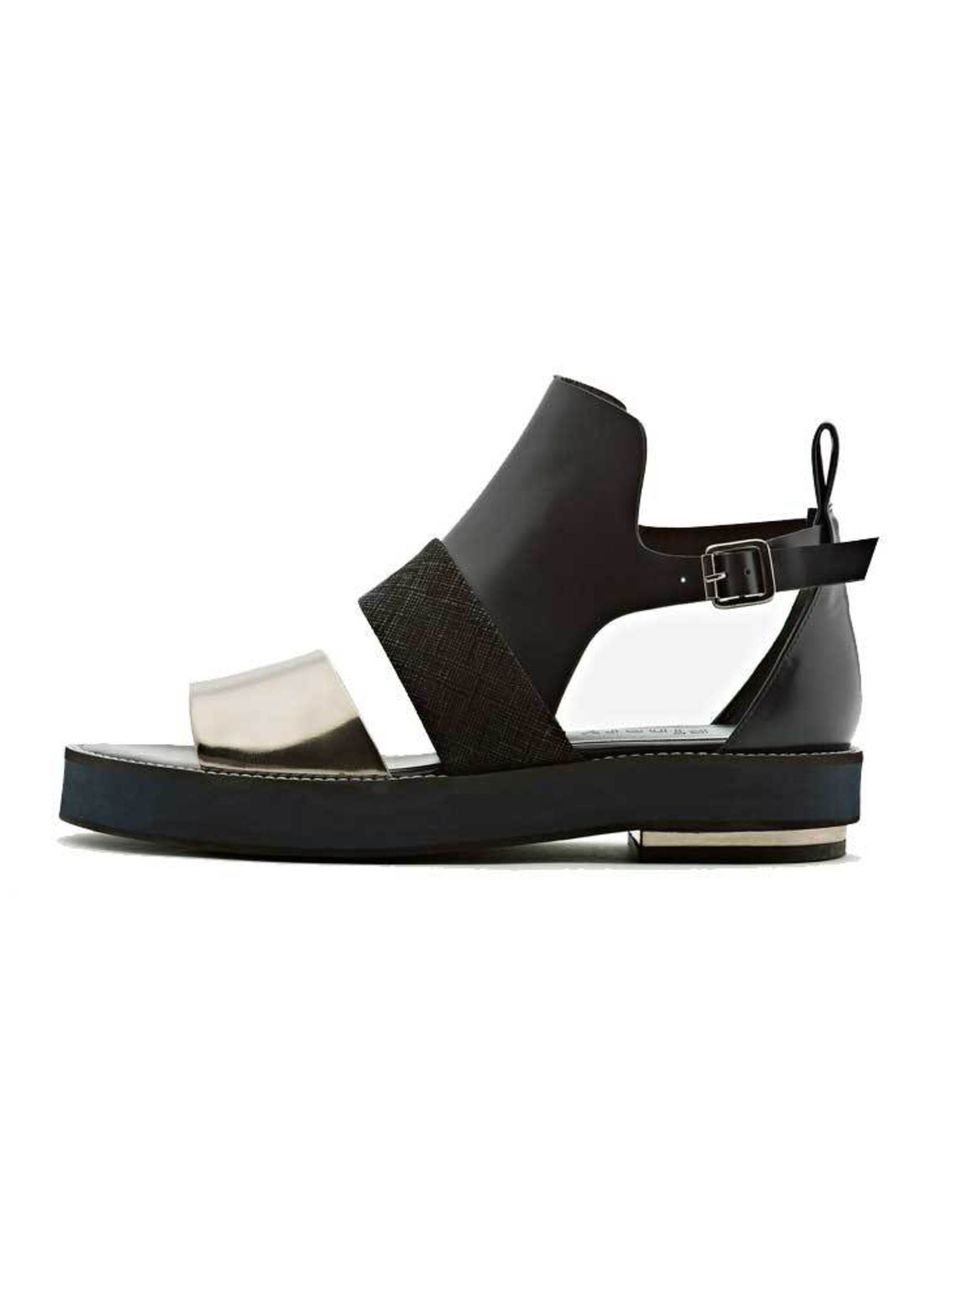 <p>Leander sandal, £95, from <a href="https://www.finerylondon.com/" target="_blank">Finerylondon.com</a></p>

<p><a href="http://www.hearstmagazines.co.uk/elle/VES10554">Read all about Finery in the March issue of ELLE, out now.</a></p>